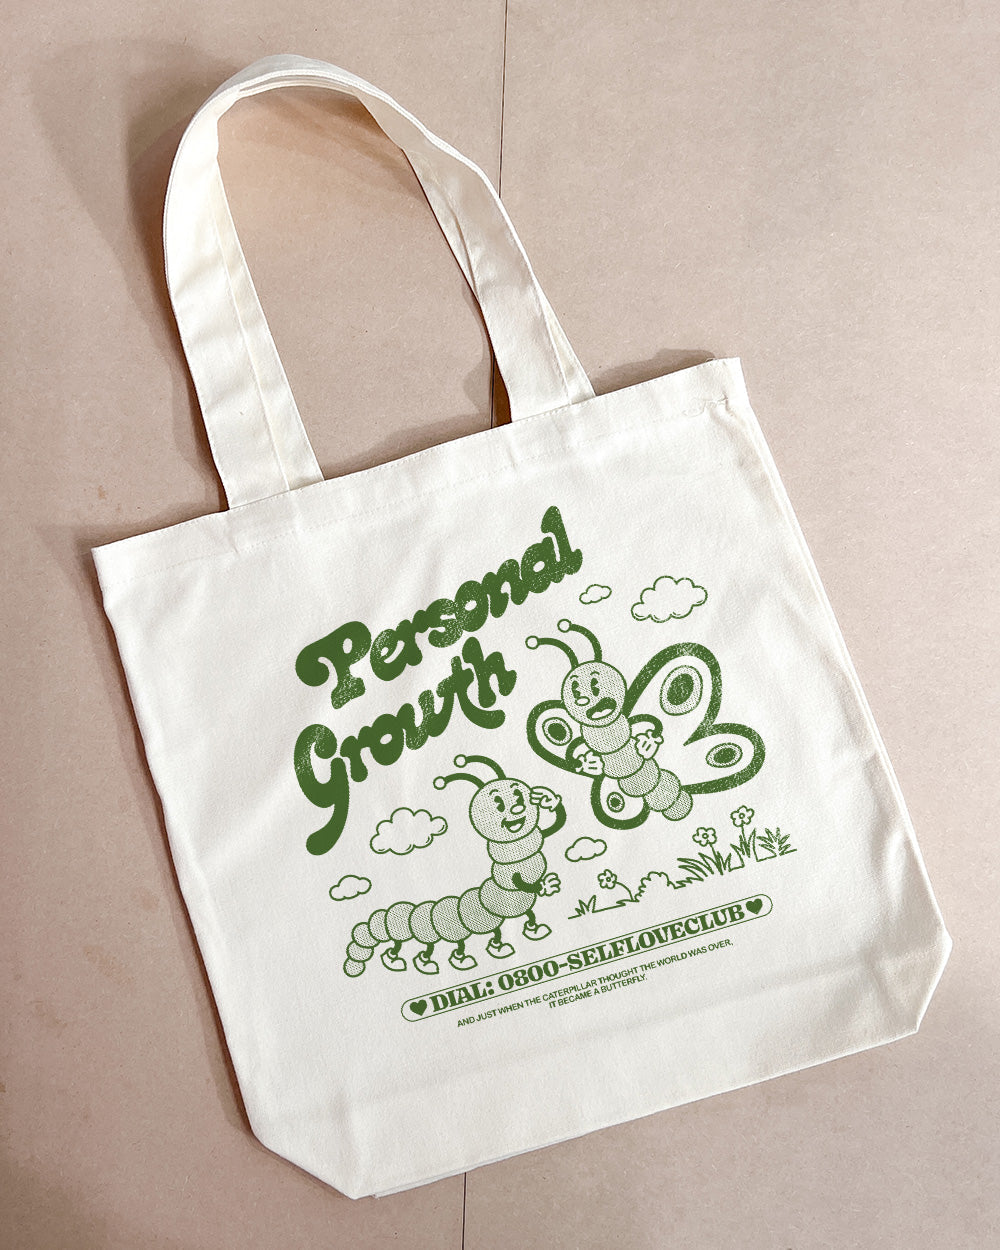 Personal Growth Tote Bag